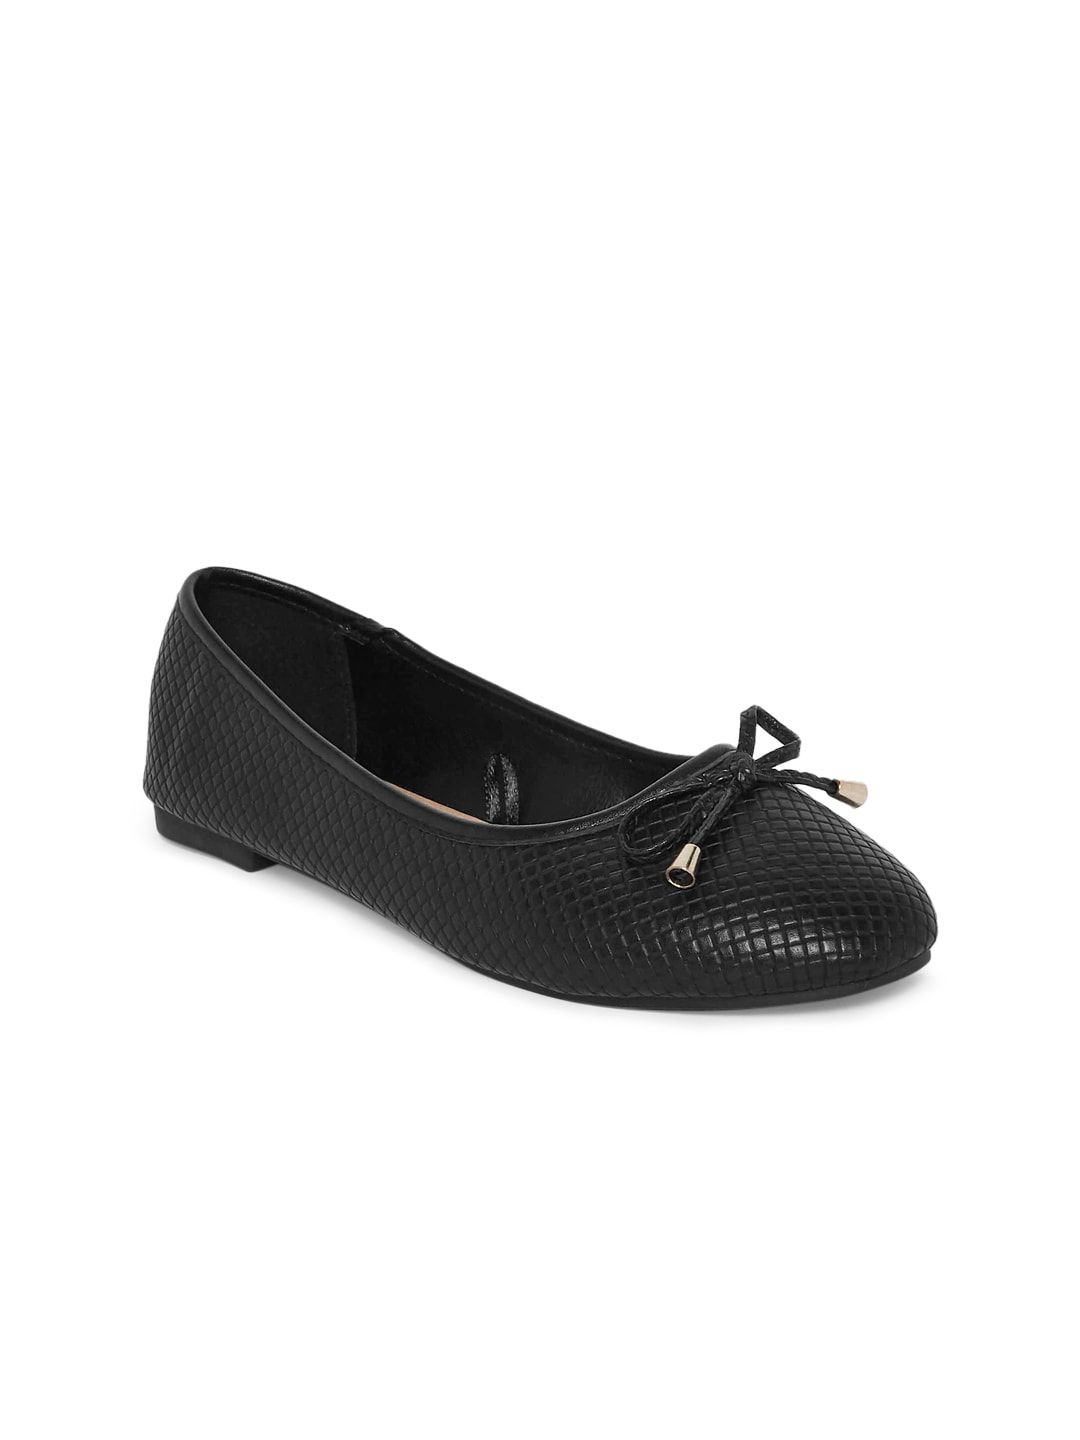 Forever Glam by Pantaloons Women Black Ballerinas with Bows Flats Price in India